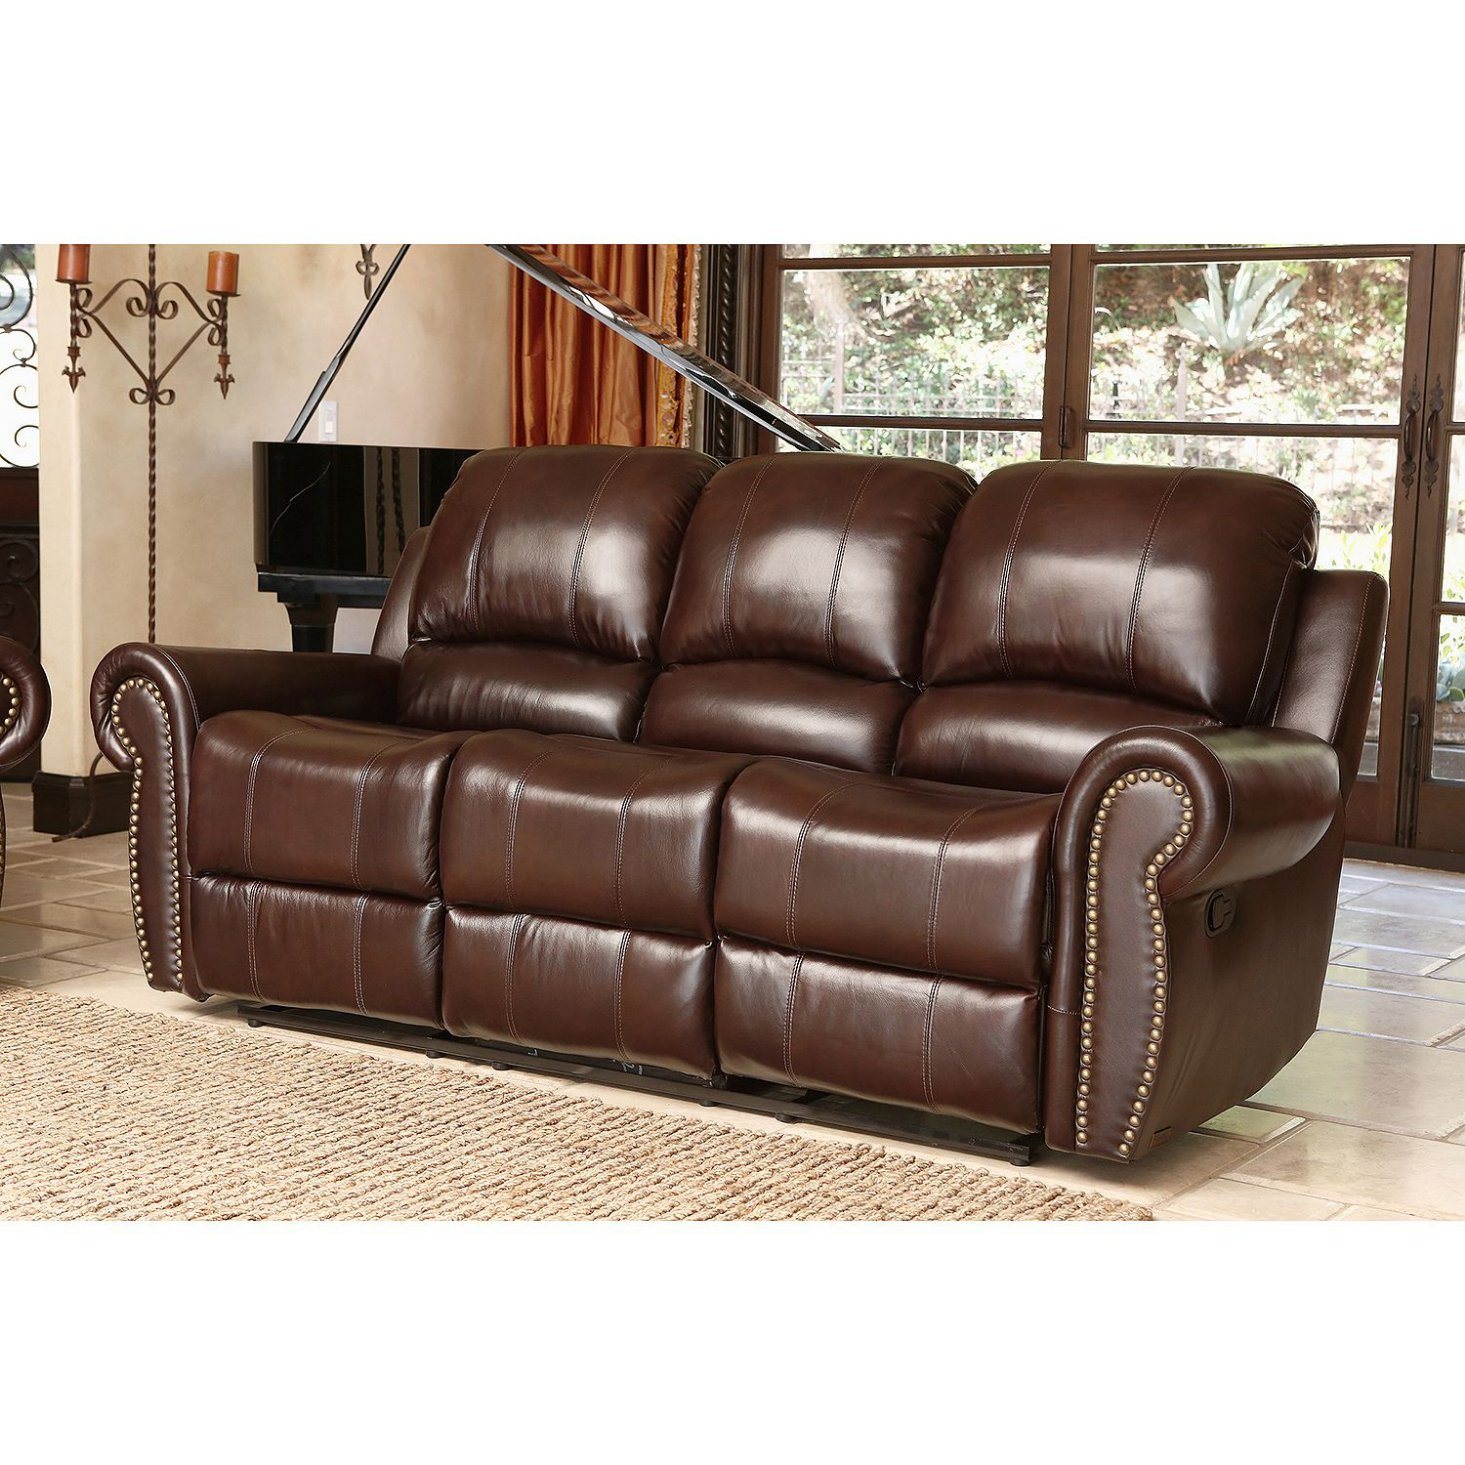 Home Theater Manual Top-Grain Leather Reclining Sofa with Nailhead Trim